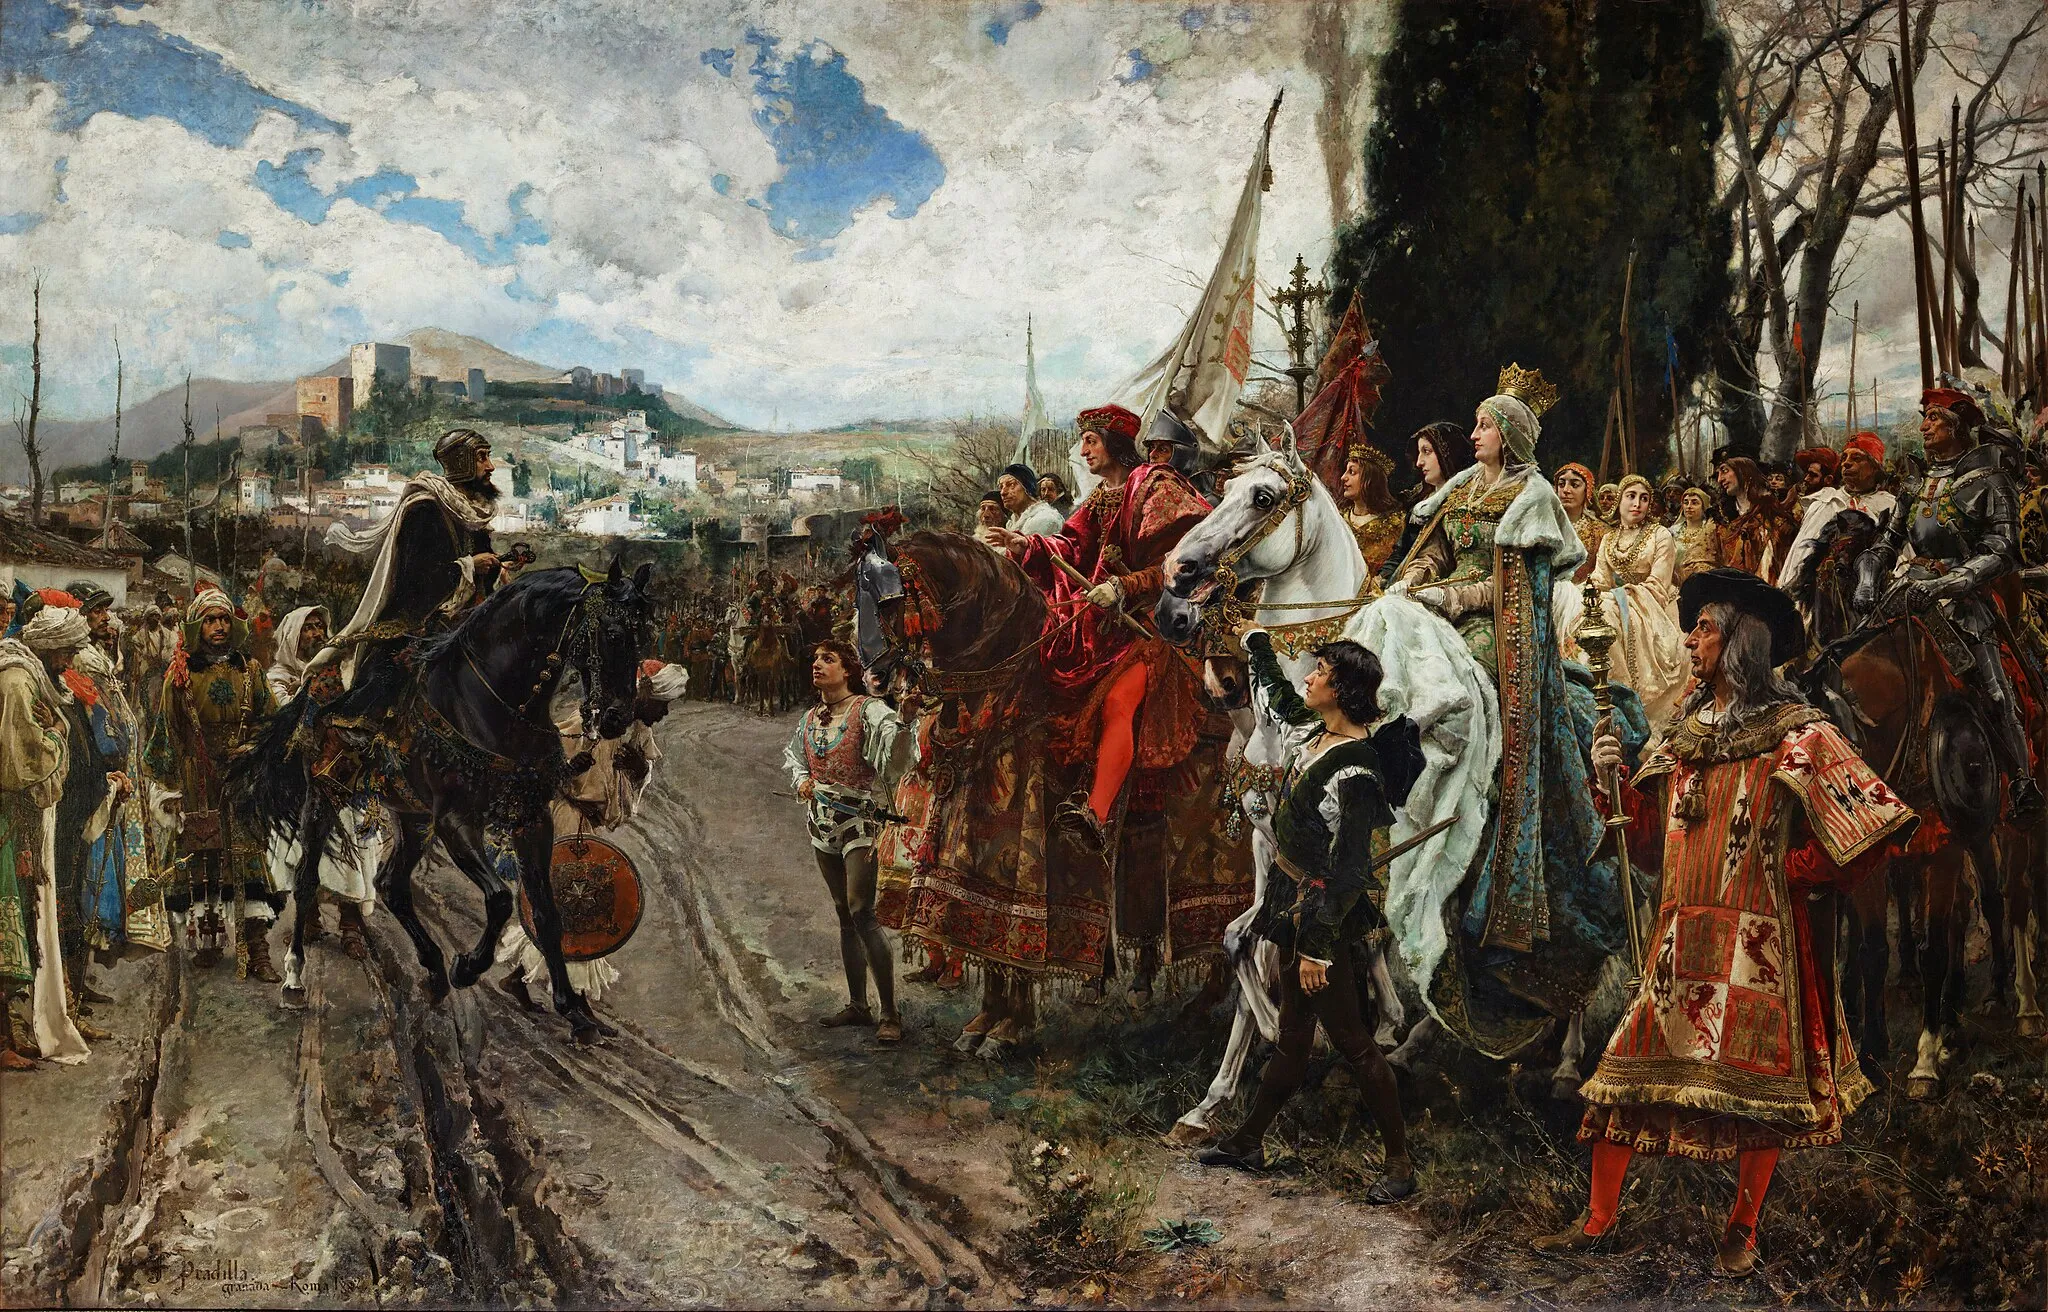 Photo showing: The Surrender of Granada: The last king of Granada, Abu Abdullah Muhammad XII, hands over Granada, the last Muslim stronghold in Andalusia, to the Catholic King Ferdinand II of Aragon